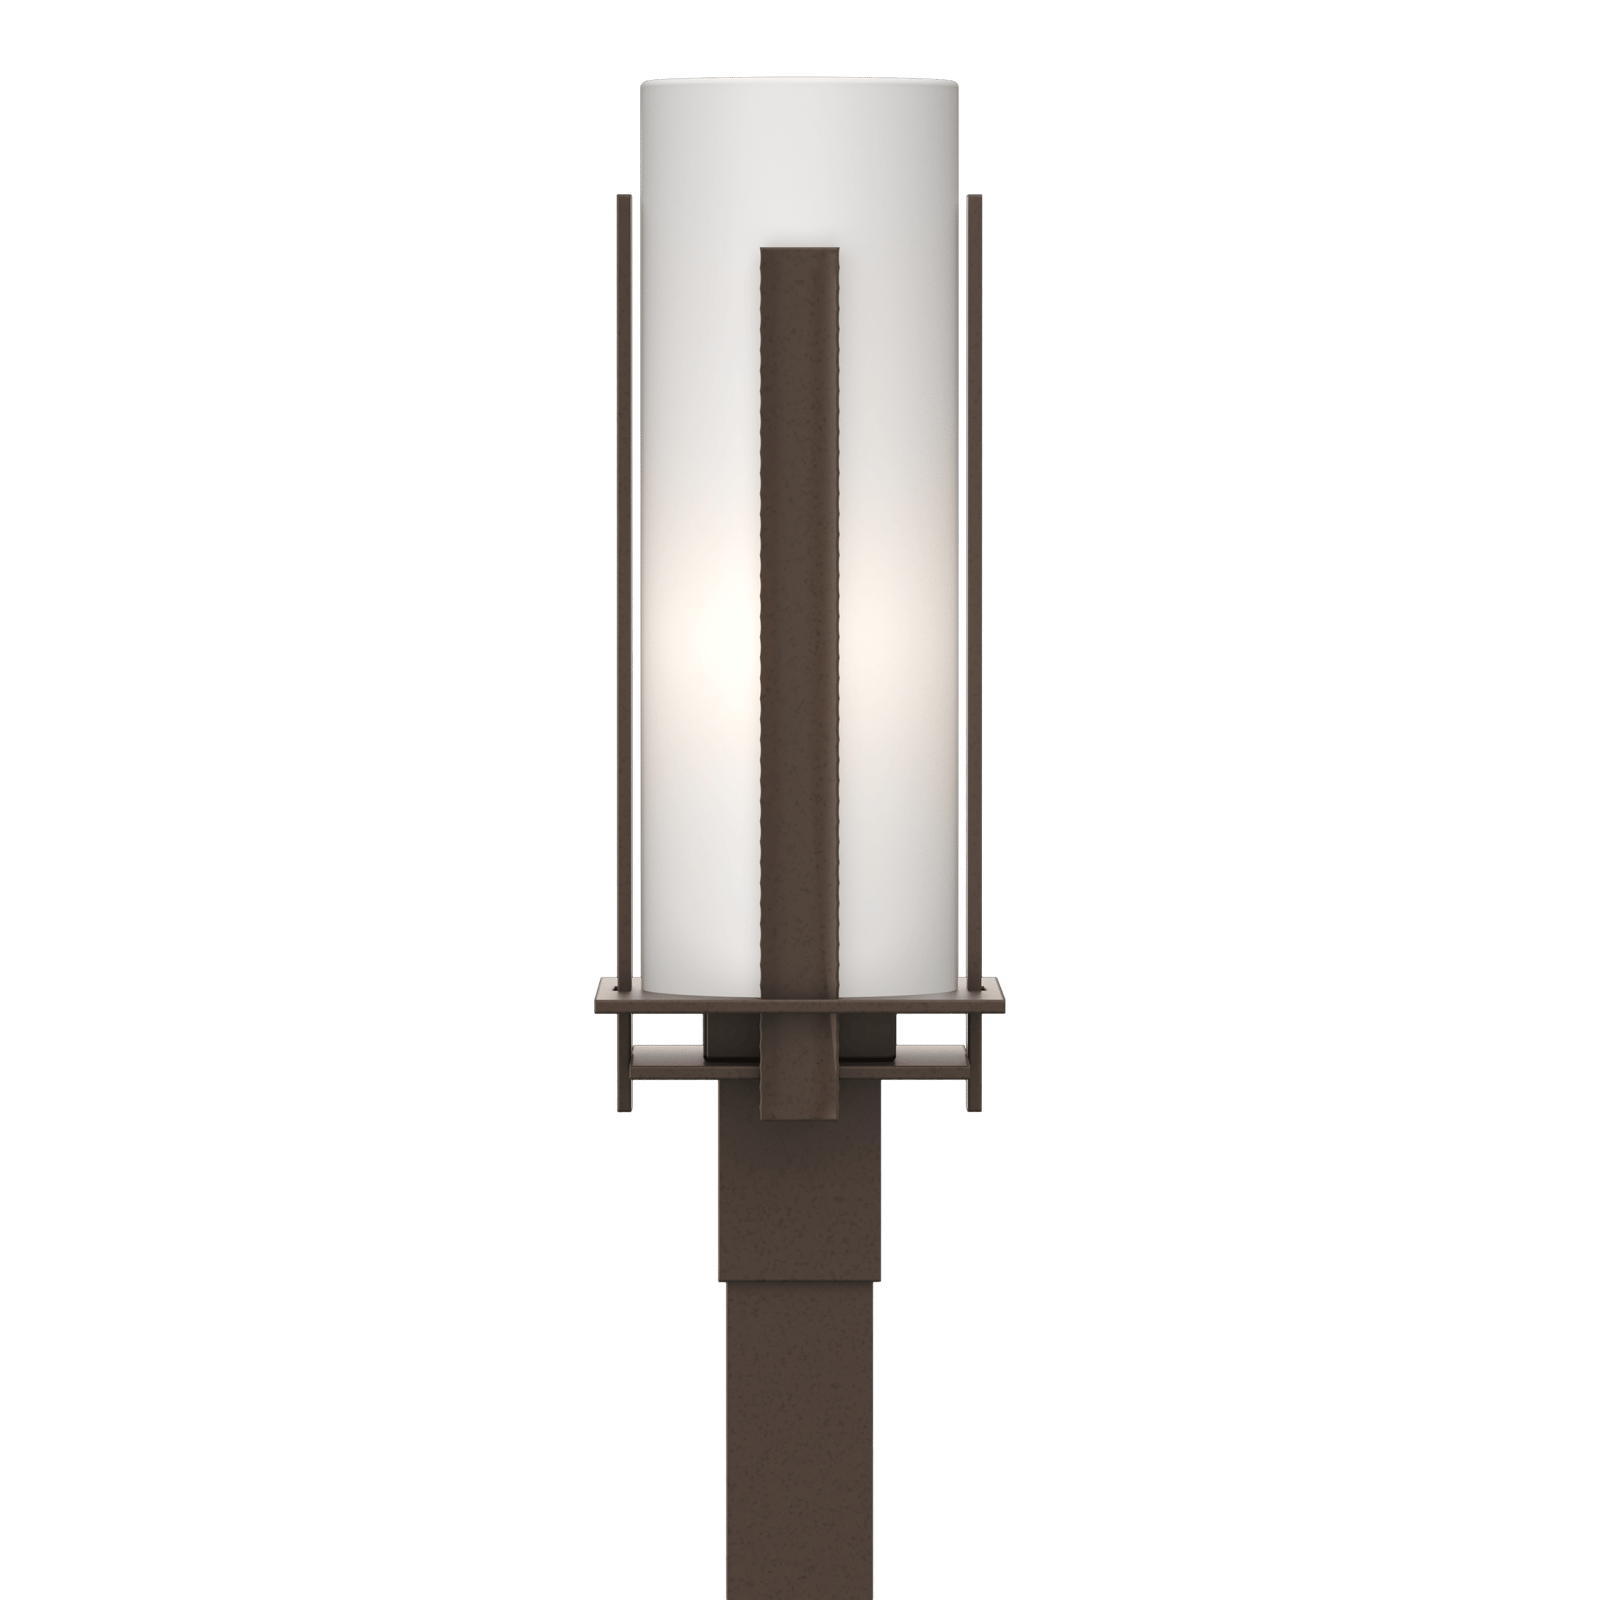 Hubbardton Forge Forged Vertical Bars Outdoor Post Light Outdoor l Post/Pier Mounts Hubbardton Forge Coastal Bronze Opal Glass (GG) 